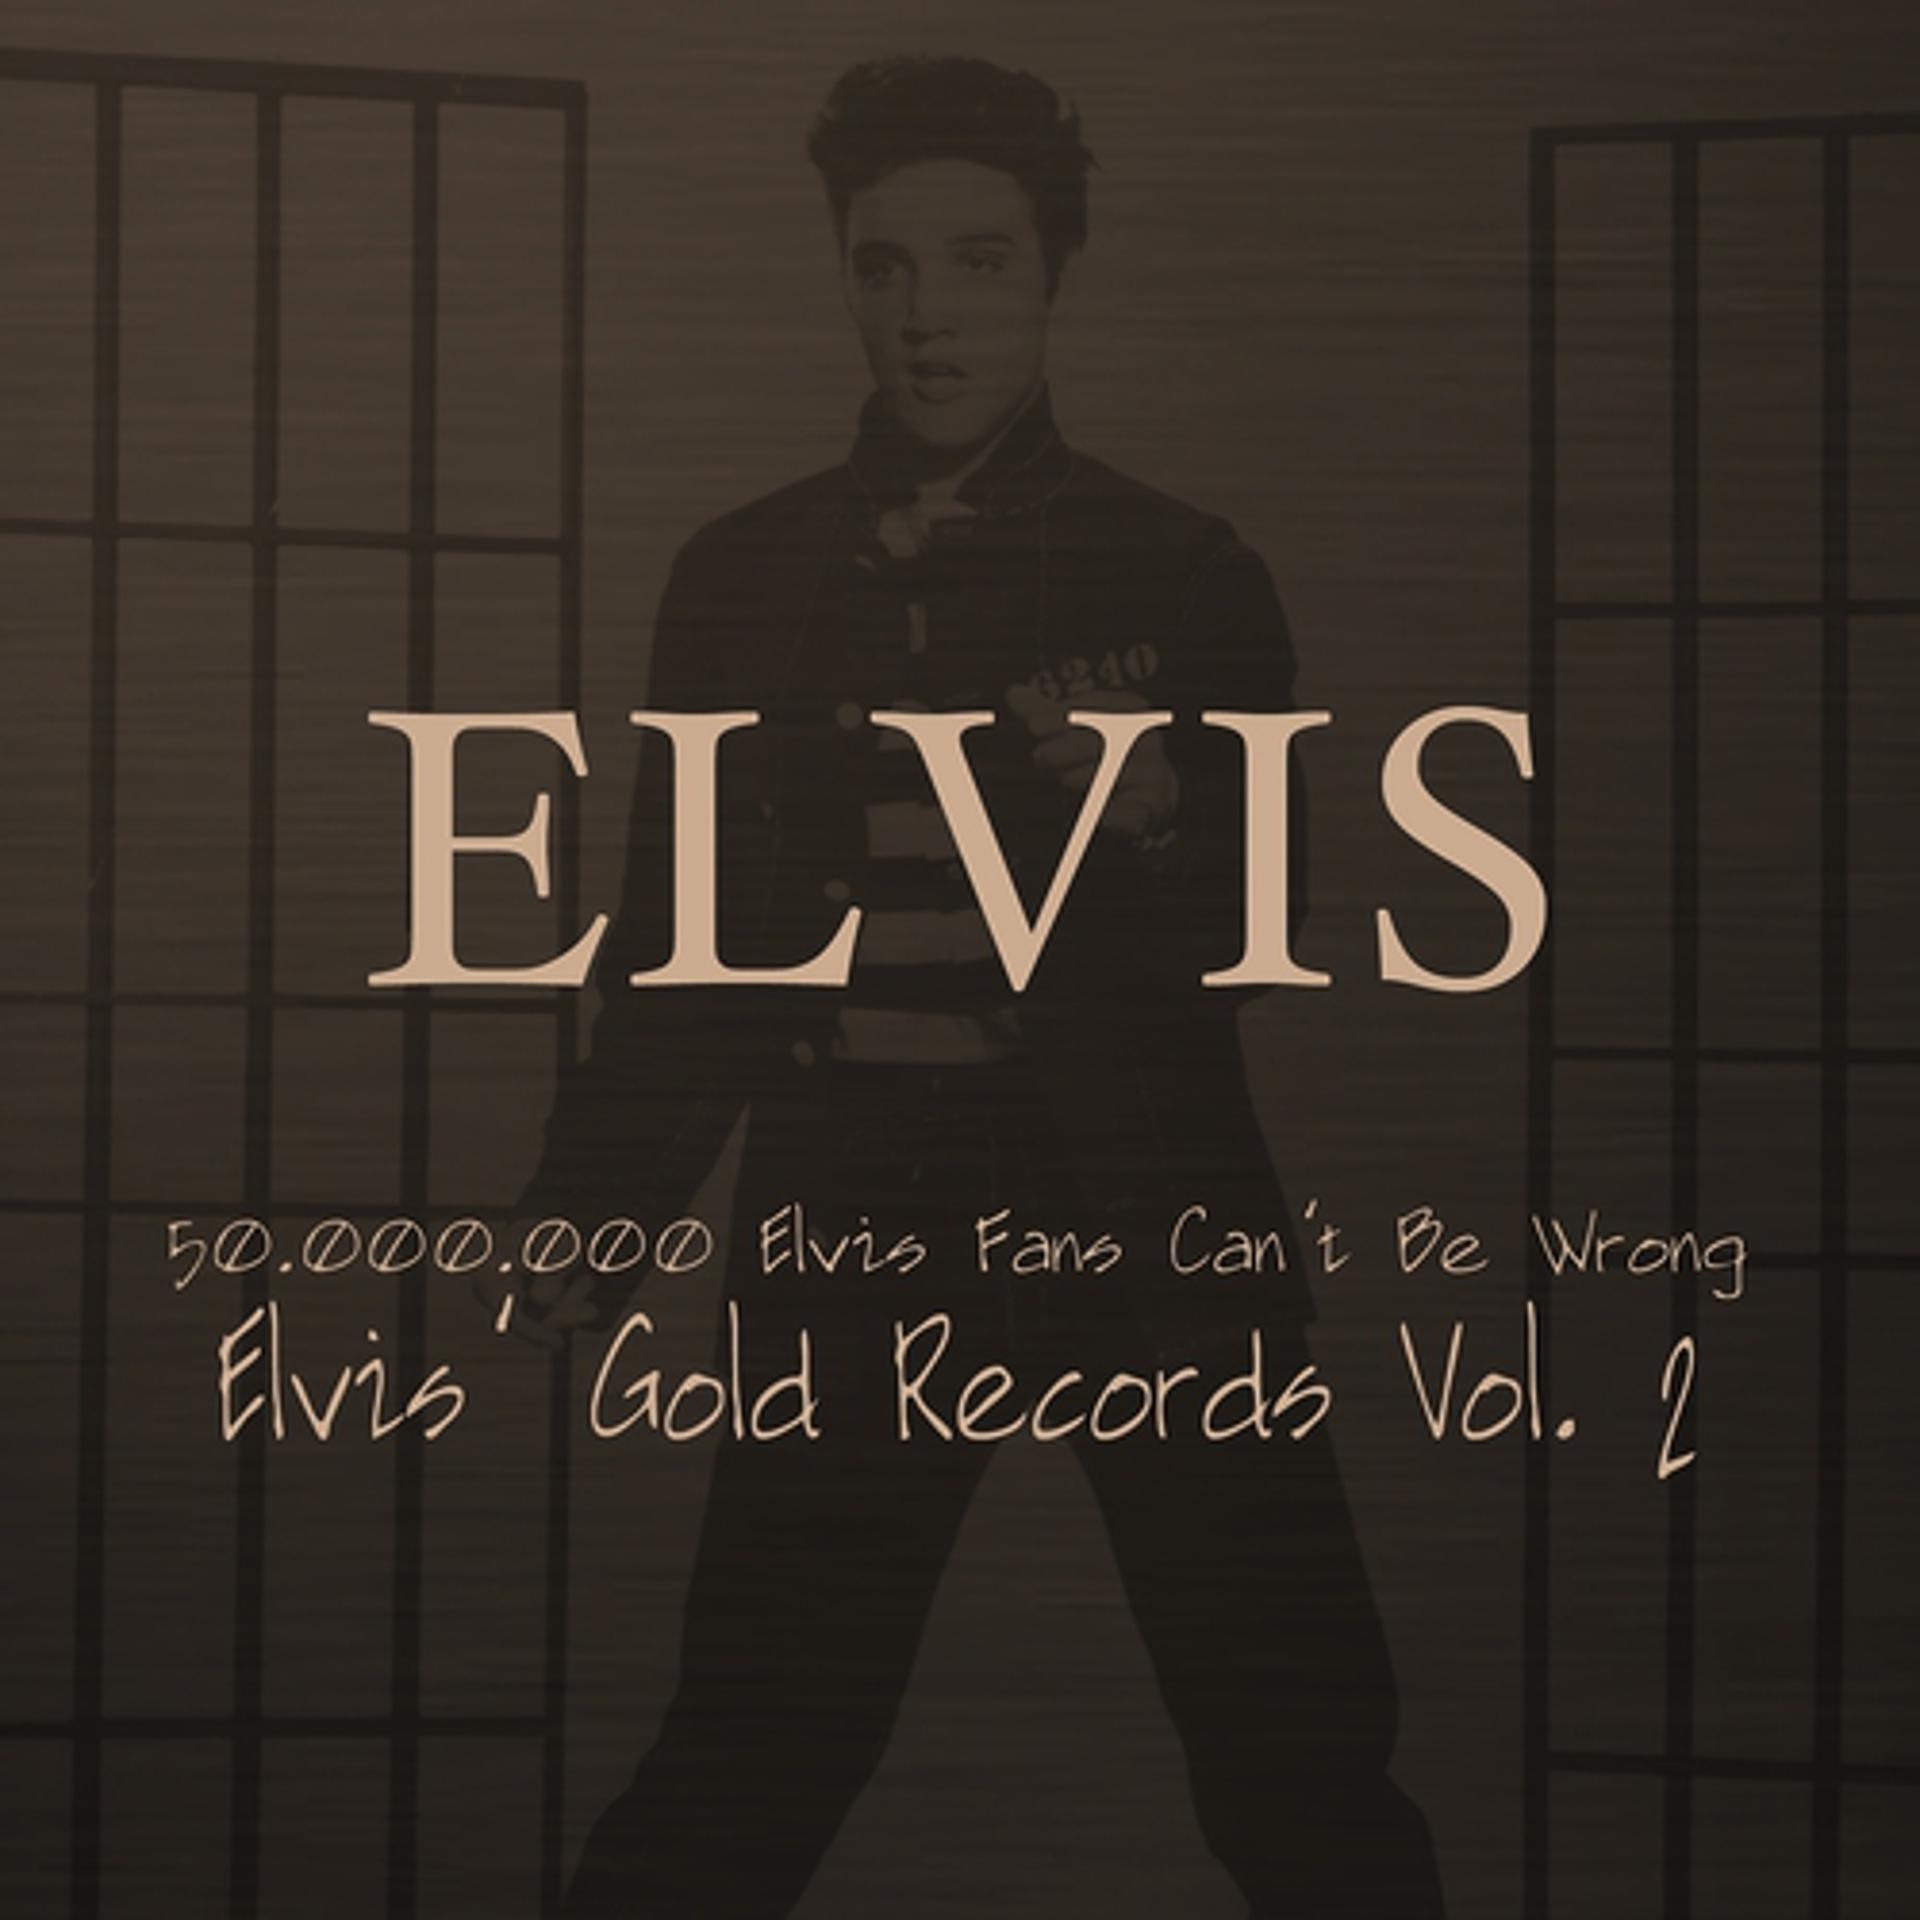 Постер альбома Elvis' Gold Records, Vol. 2 (50.000.000 Elvis Fans Can't Be Wrong)